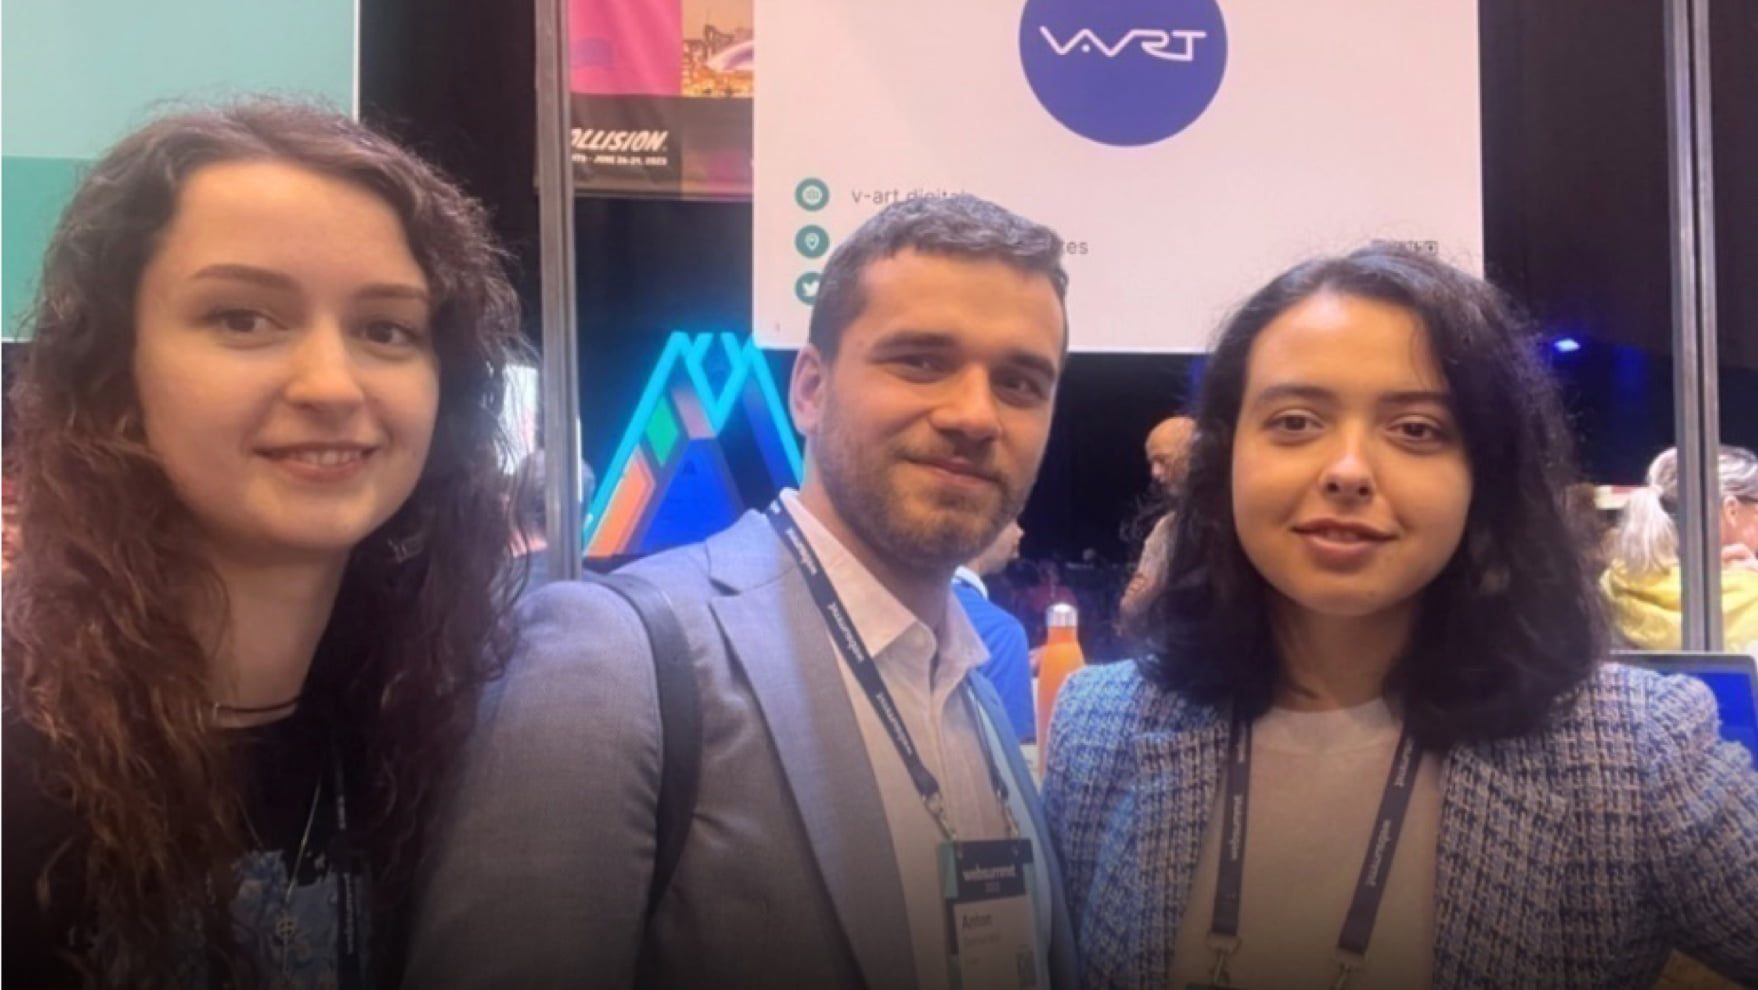 Sigma Software team and V-Art representatives on the global Web Summit